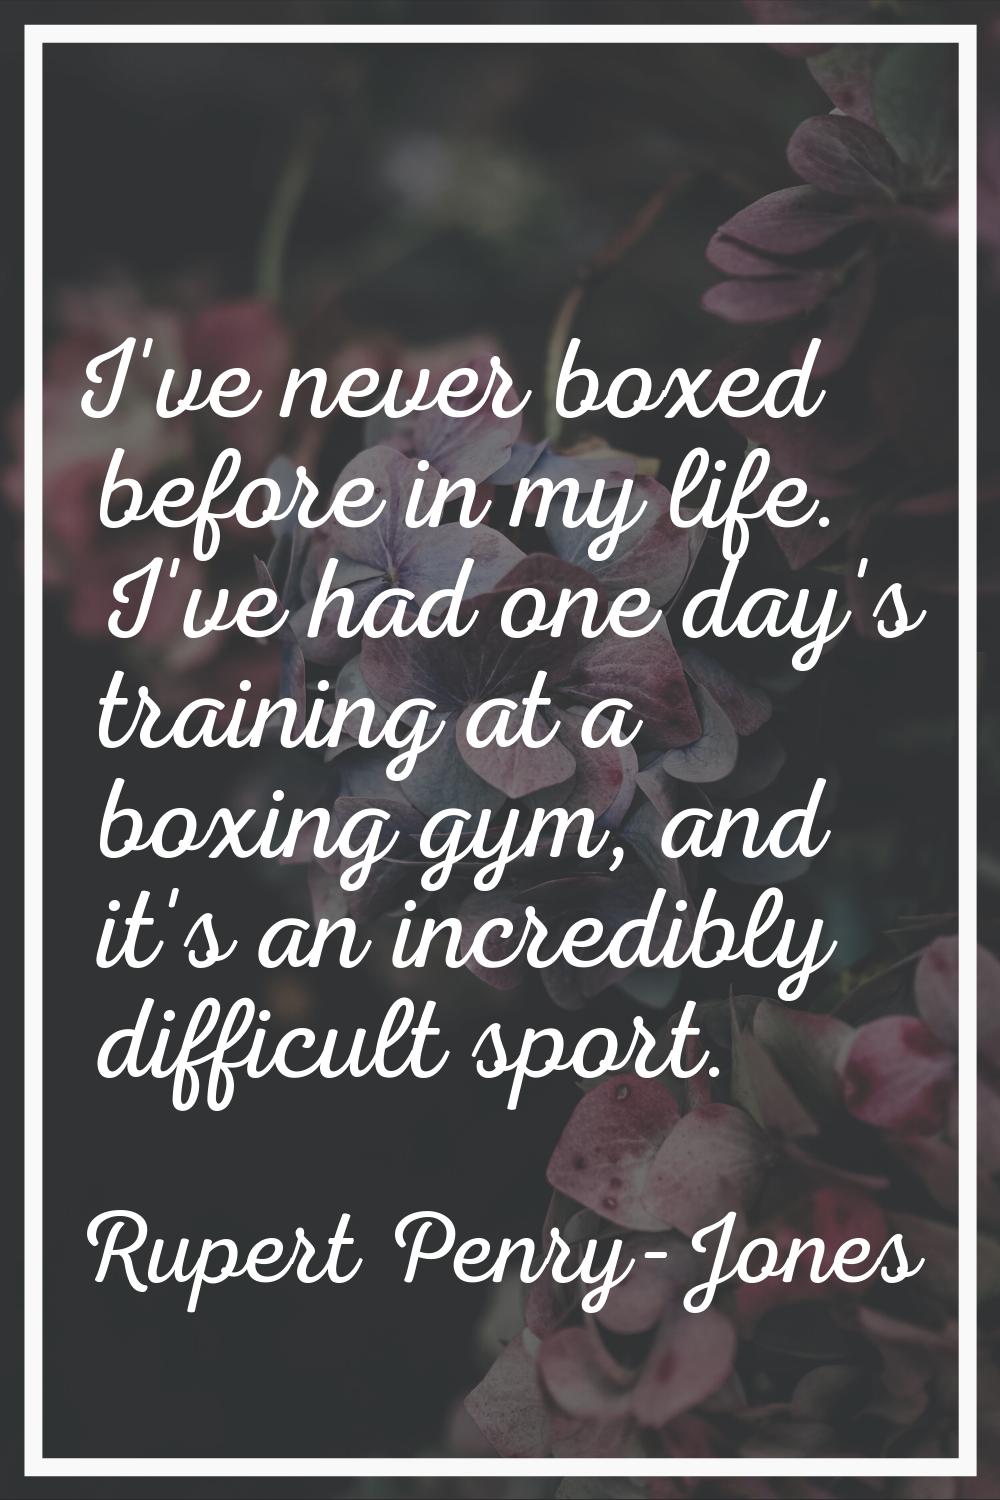 I've never boxed before in my life. I've had one day's training at a boxing gym, and it's an incred